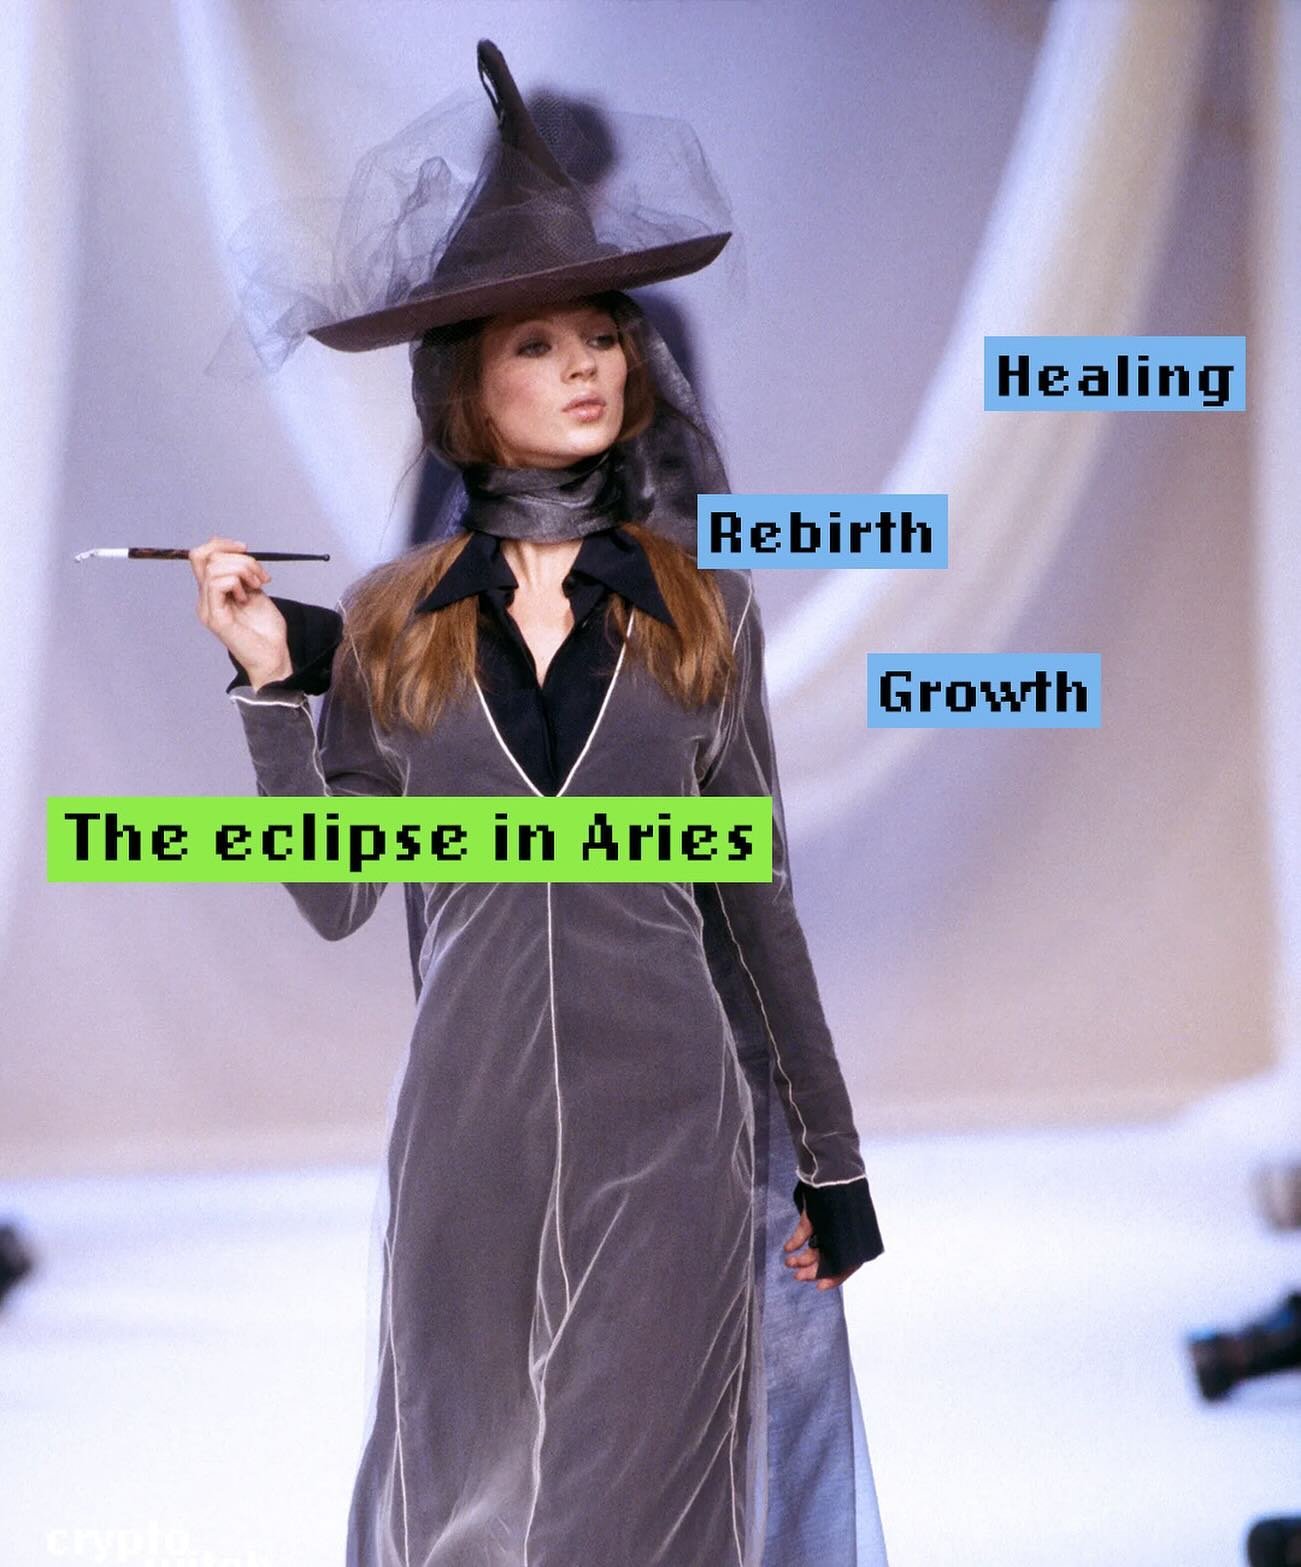 Does a solar eclipse in the middle of Mercury retrograde scare you? ✨✨ (It shouldn&rsquo;t.)🌖 This eclipse in Aries ♈️ will bring &hellip; 👇👇👇

✨ New beginnings and journeys 
✨ Healing, restorative energy 
✨ Personal discoveries 
✨ Big changes th